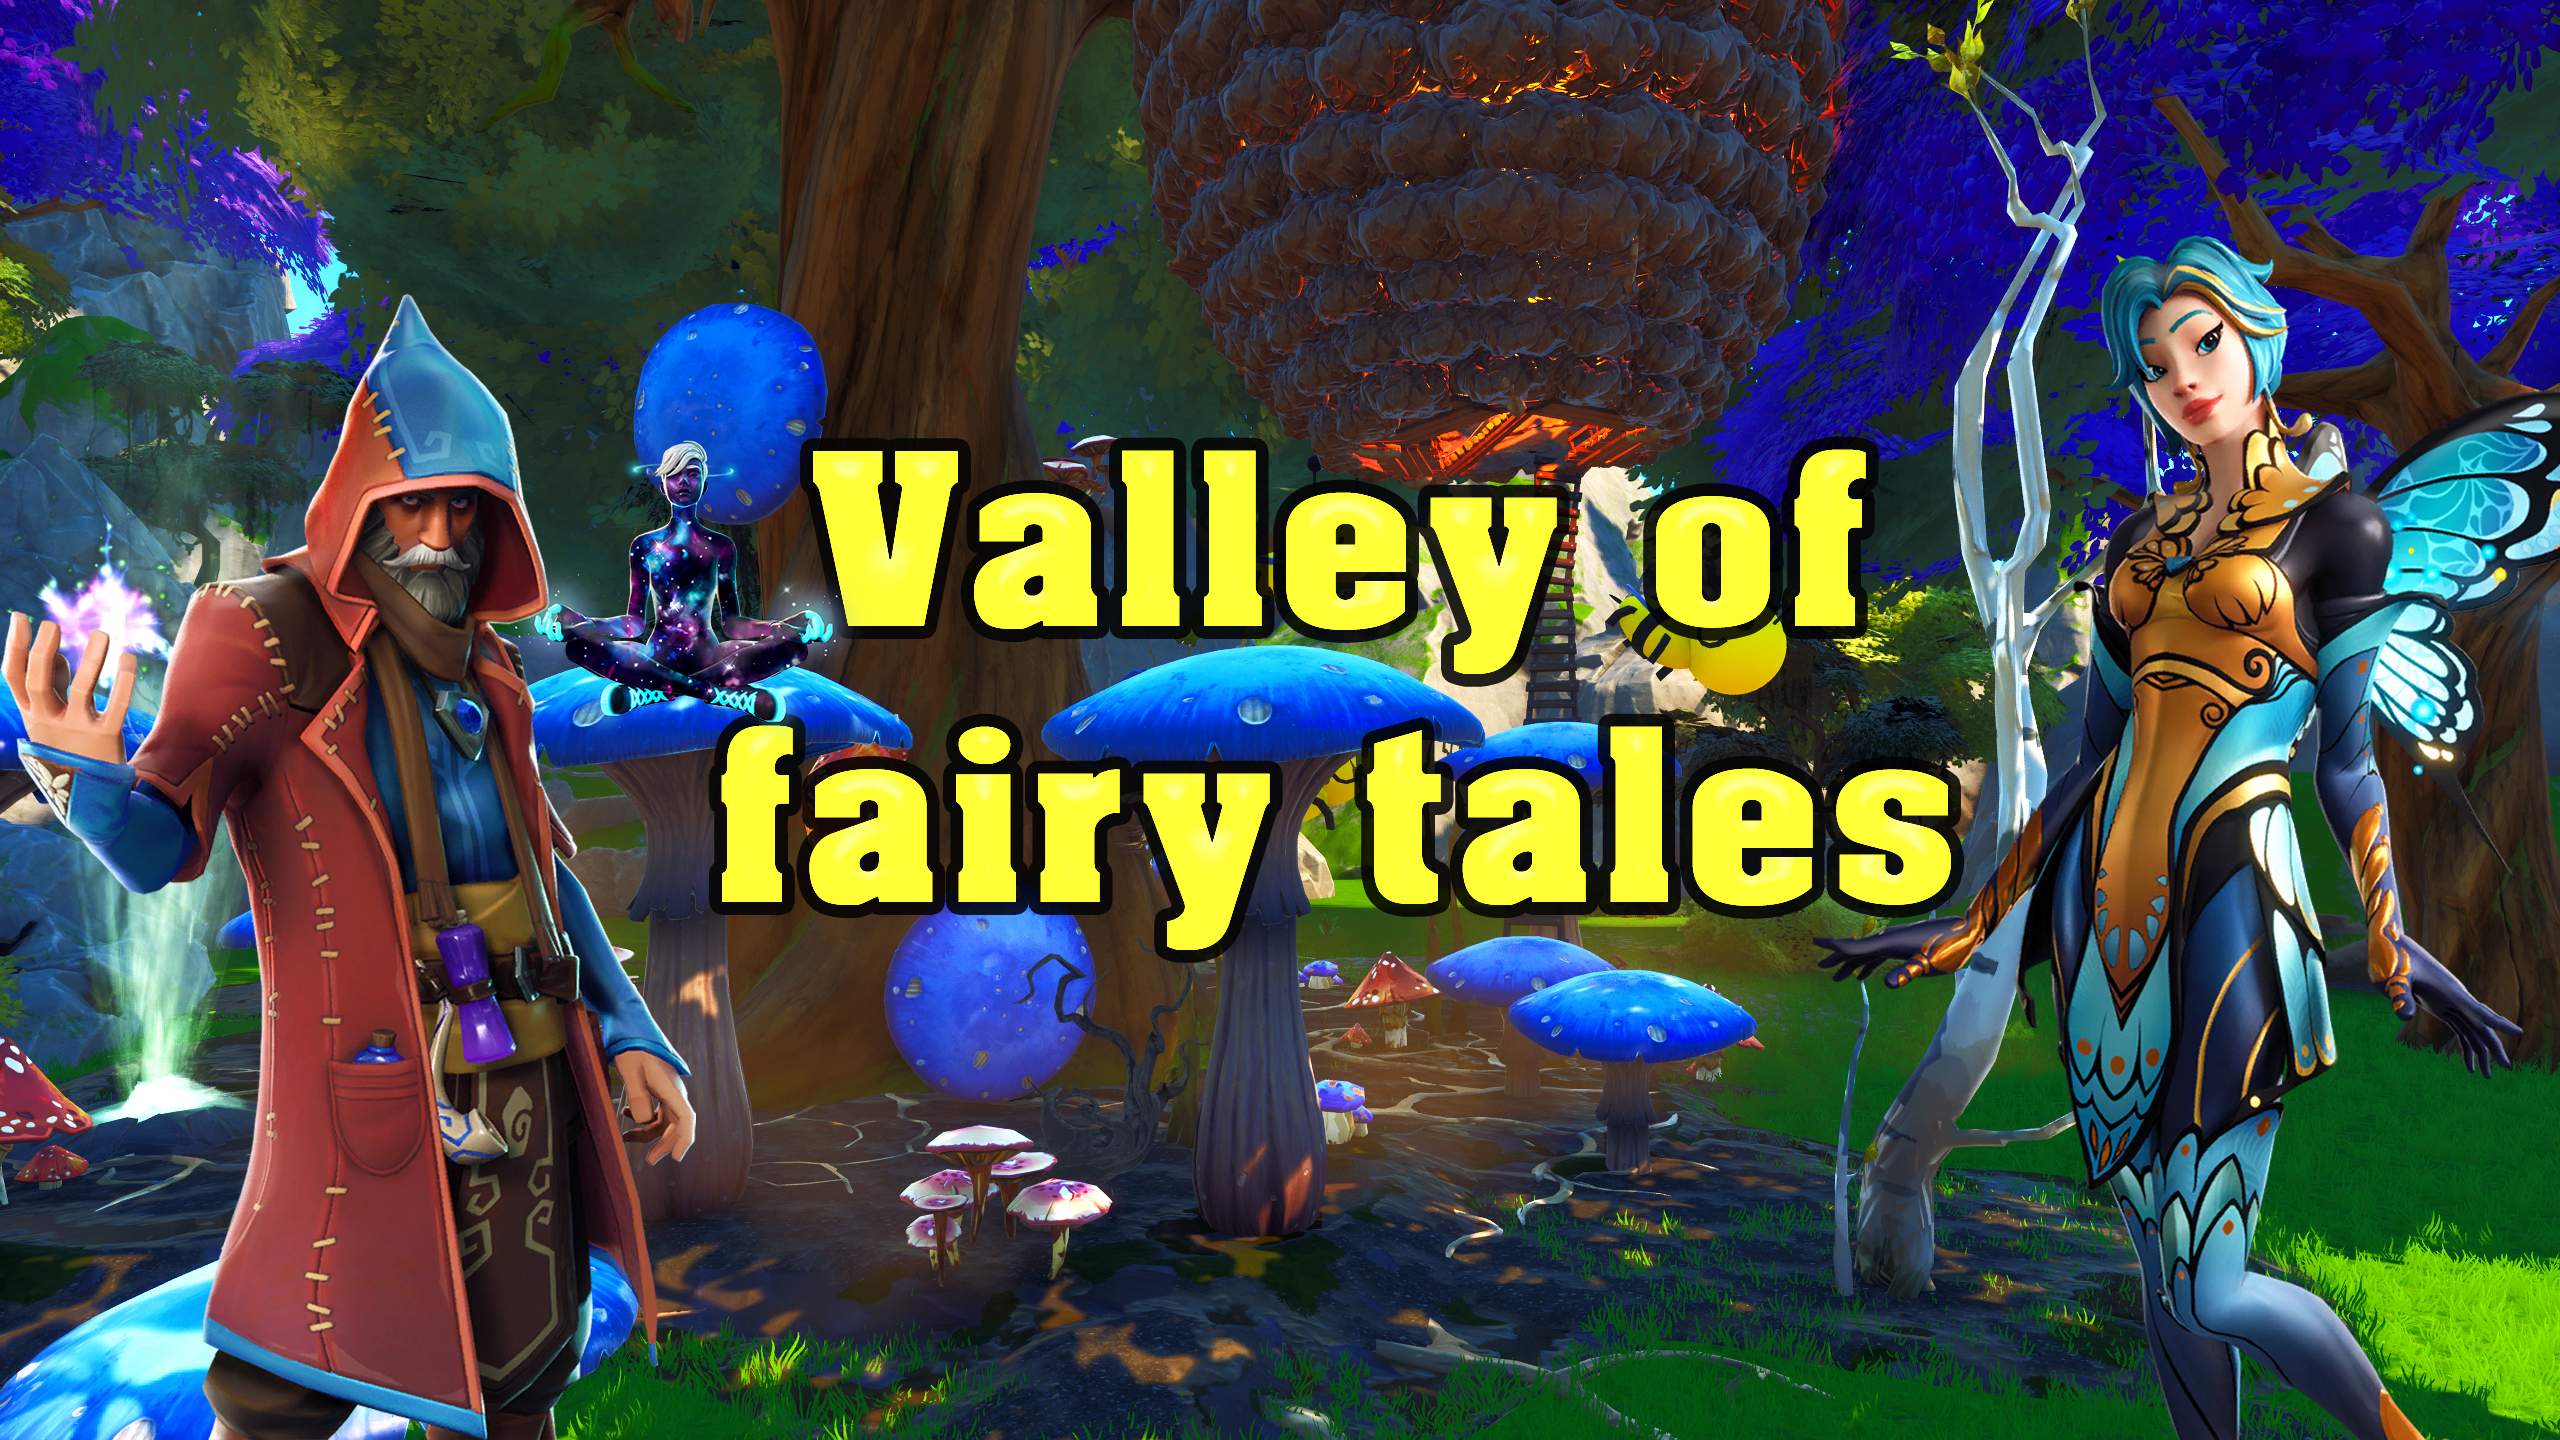 Valley of faire tales🧚‍♀️✨